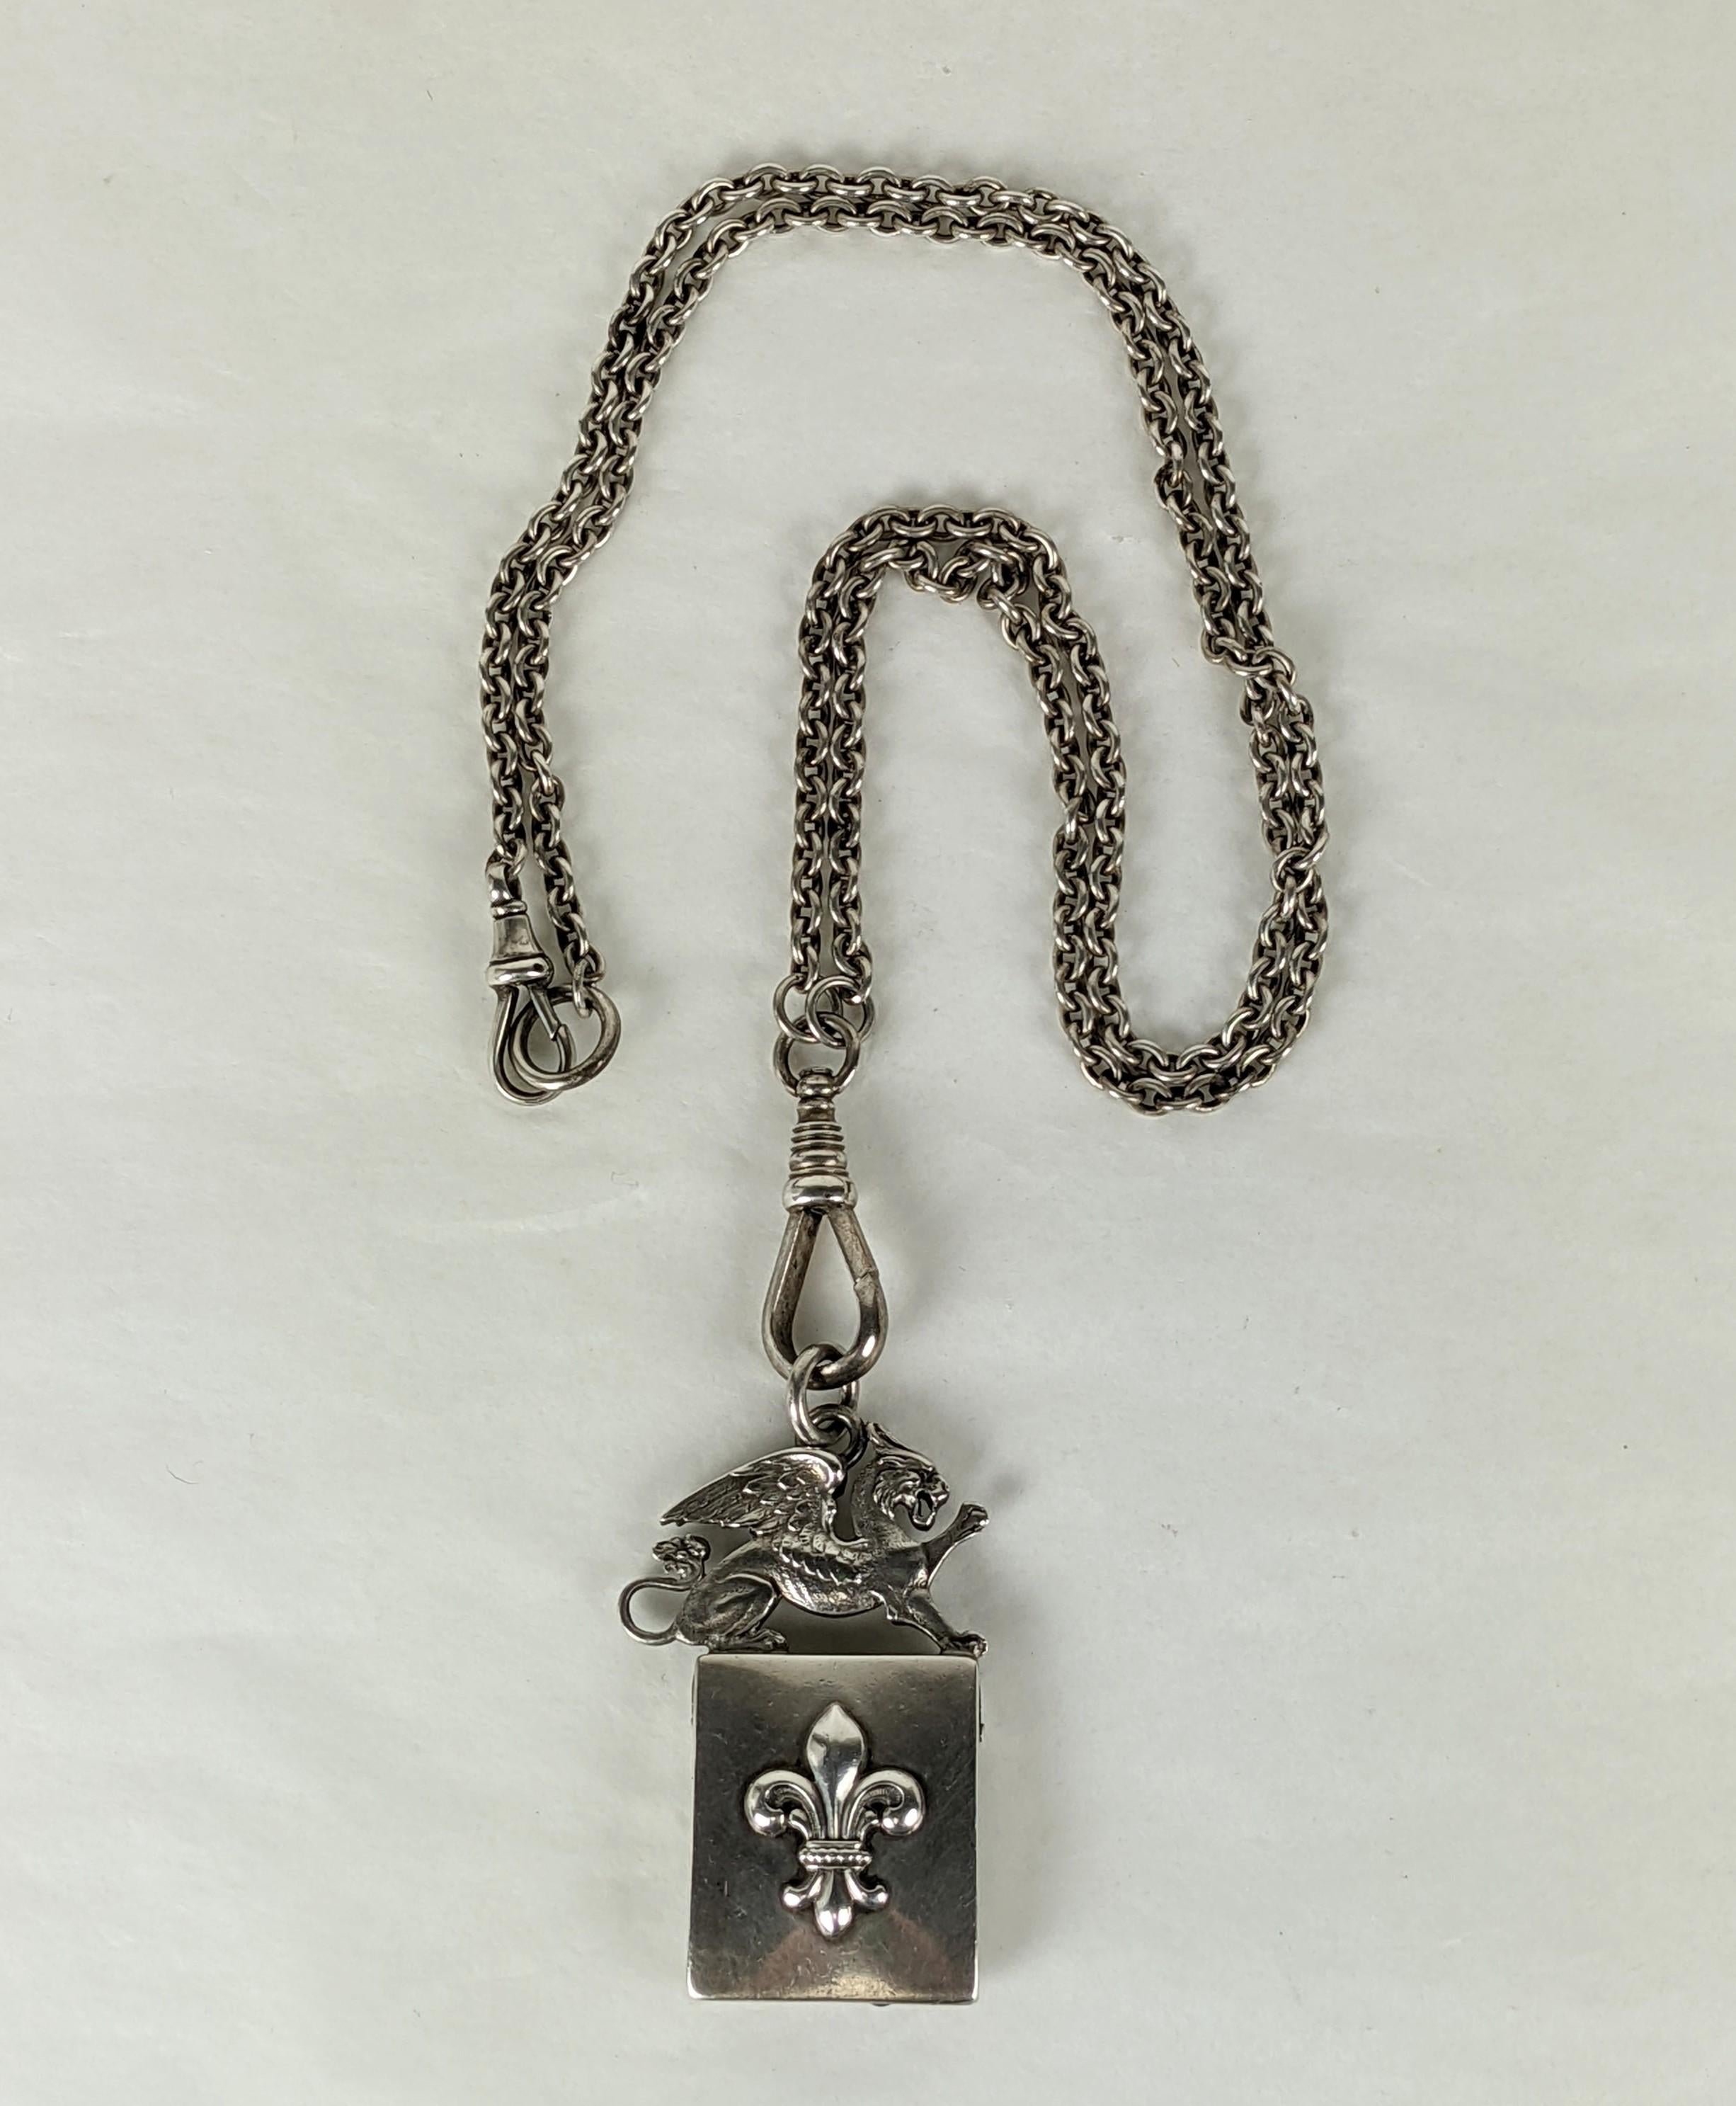 Victorian Shiebler Pendant Necklace composed of a late 19th Century winged lion whistle pendant attached to antique Victorian silver chains with heavy, period swivel clasps. Has the look of Chrome Hearts but from OVER 150 years ago. Superb quality,